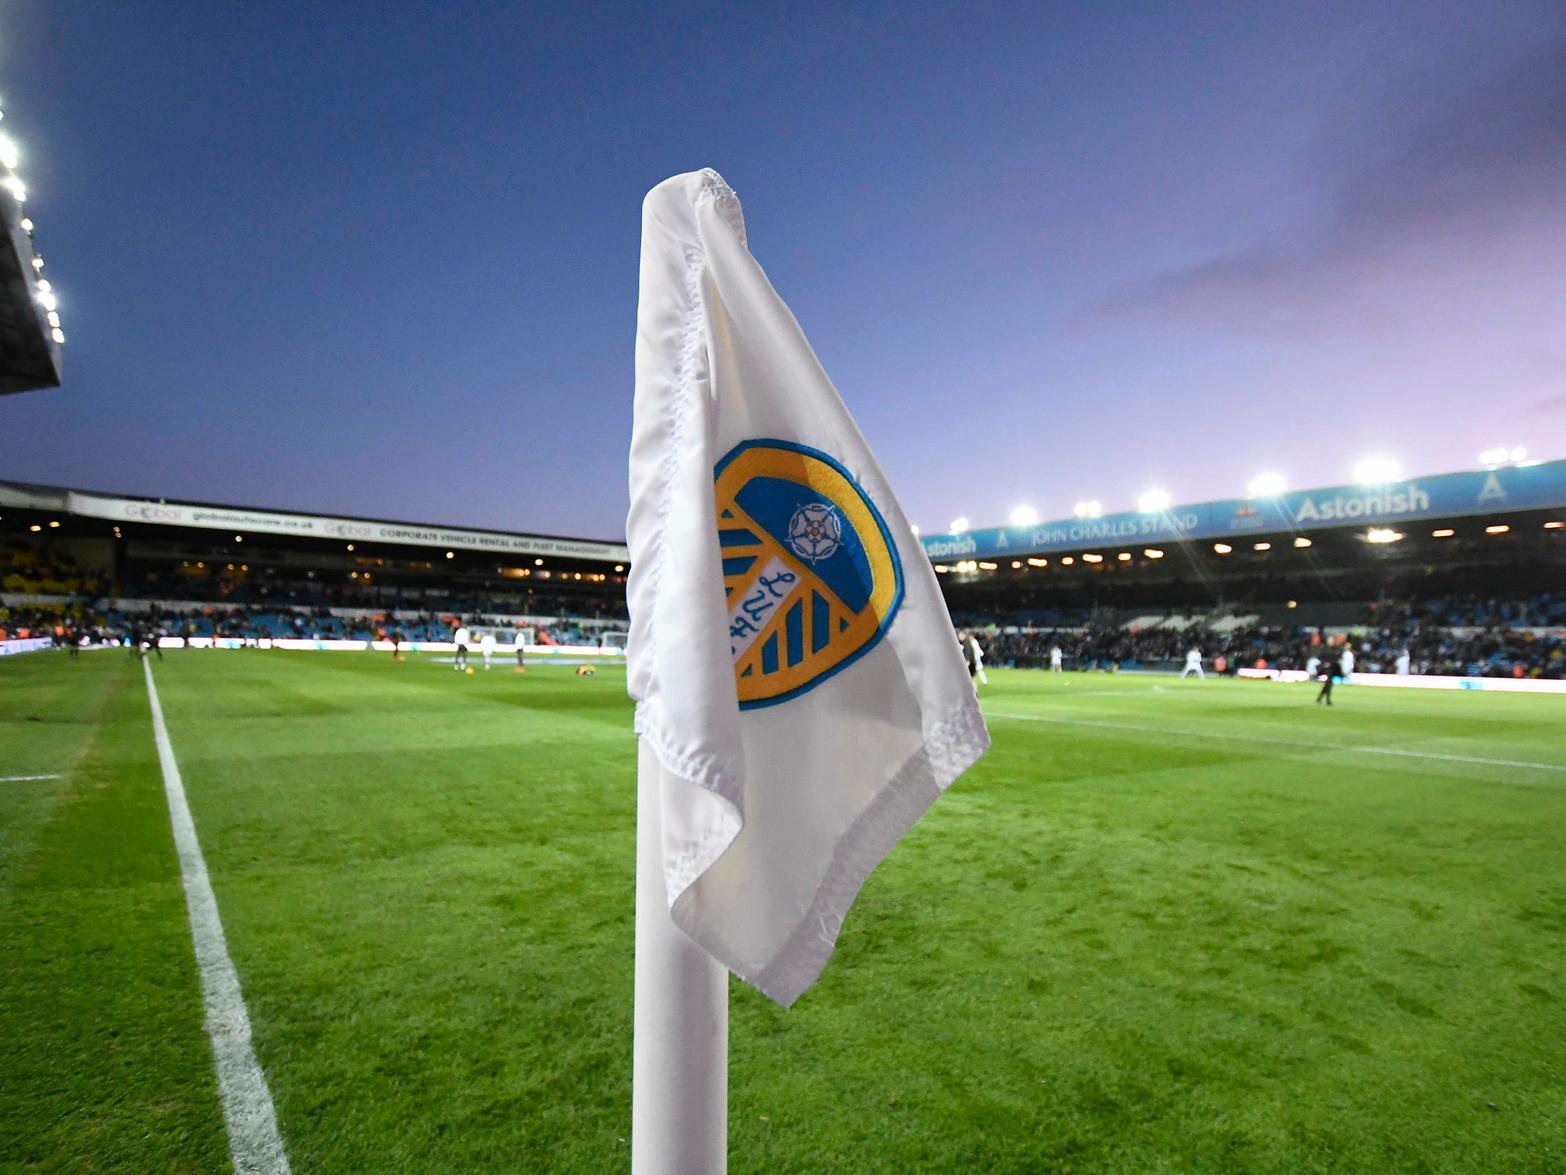 Reports have claimed that Fulham are the latest side to take an interest in Chelsea youngster Ashley Akpan, and could look to disrupt Leeds United's ongoing attempts to sign the young defender. (Football Insider)